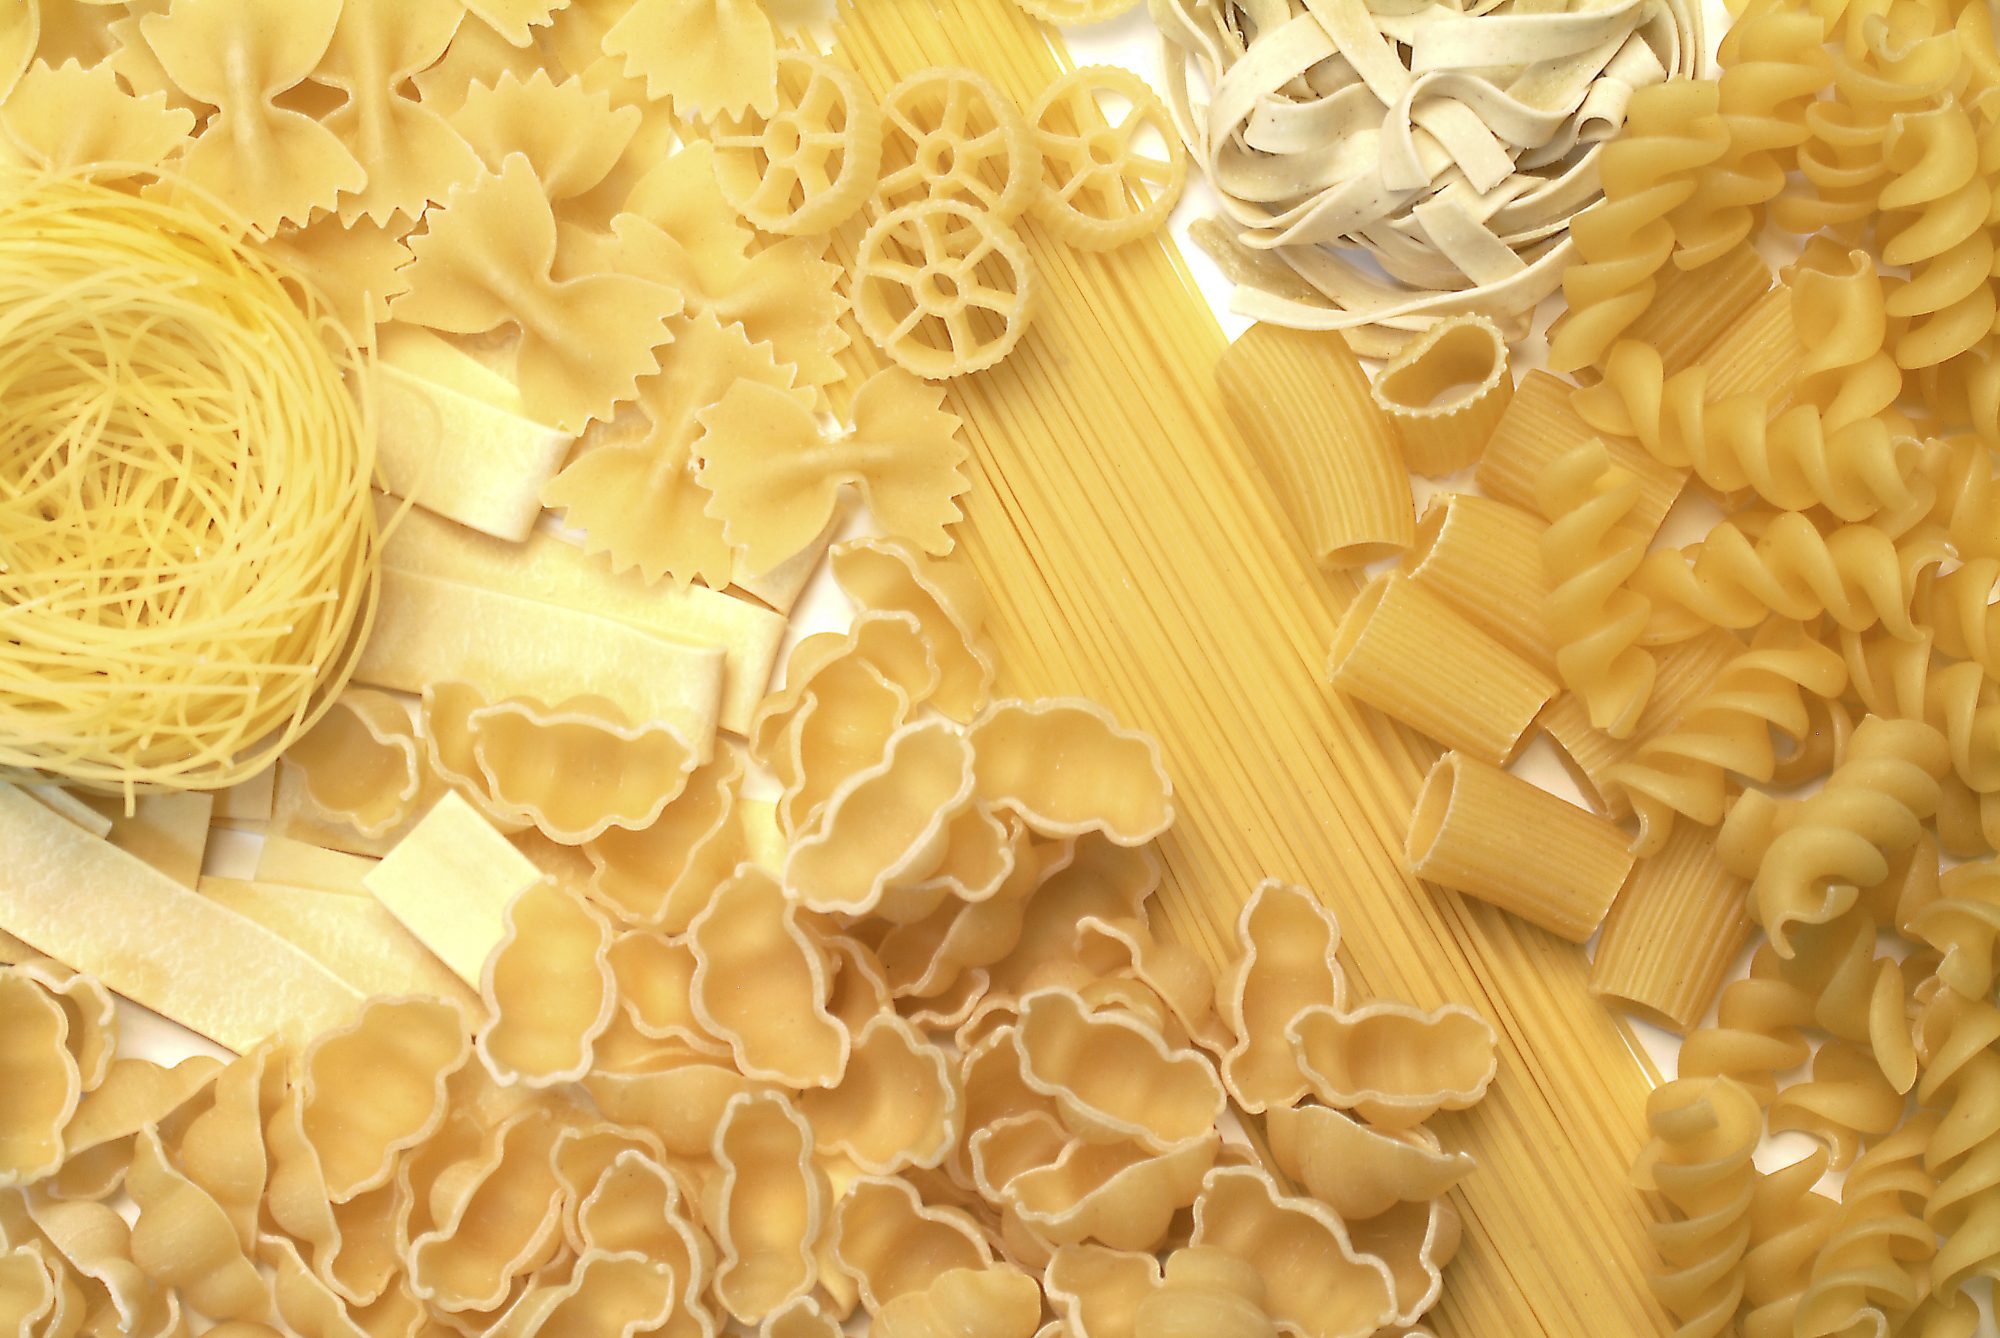 7 Underrated Pasta Shapes That are Way More Exciting Than Penne | MyRecipes